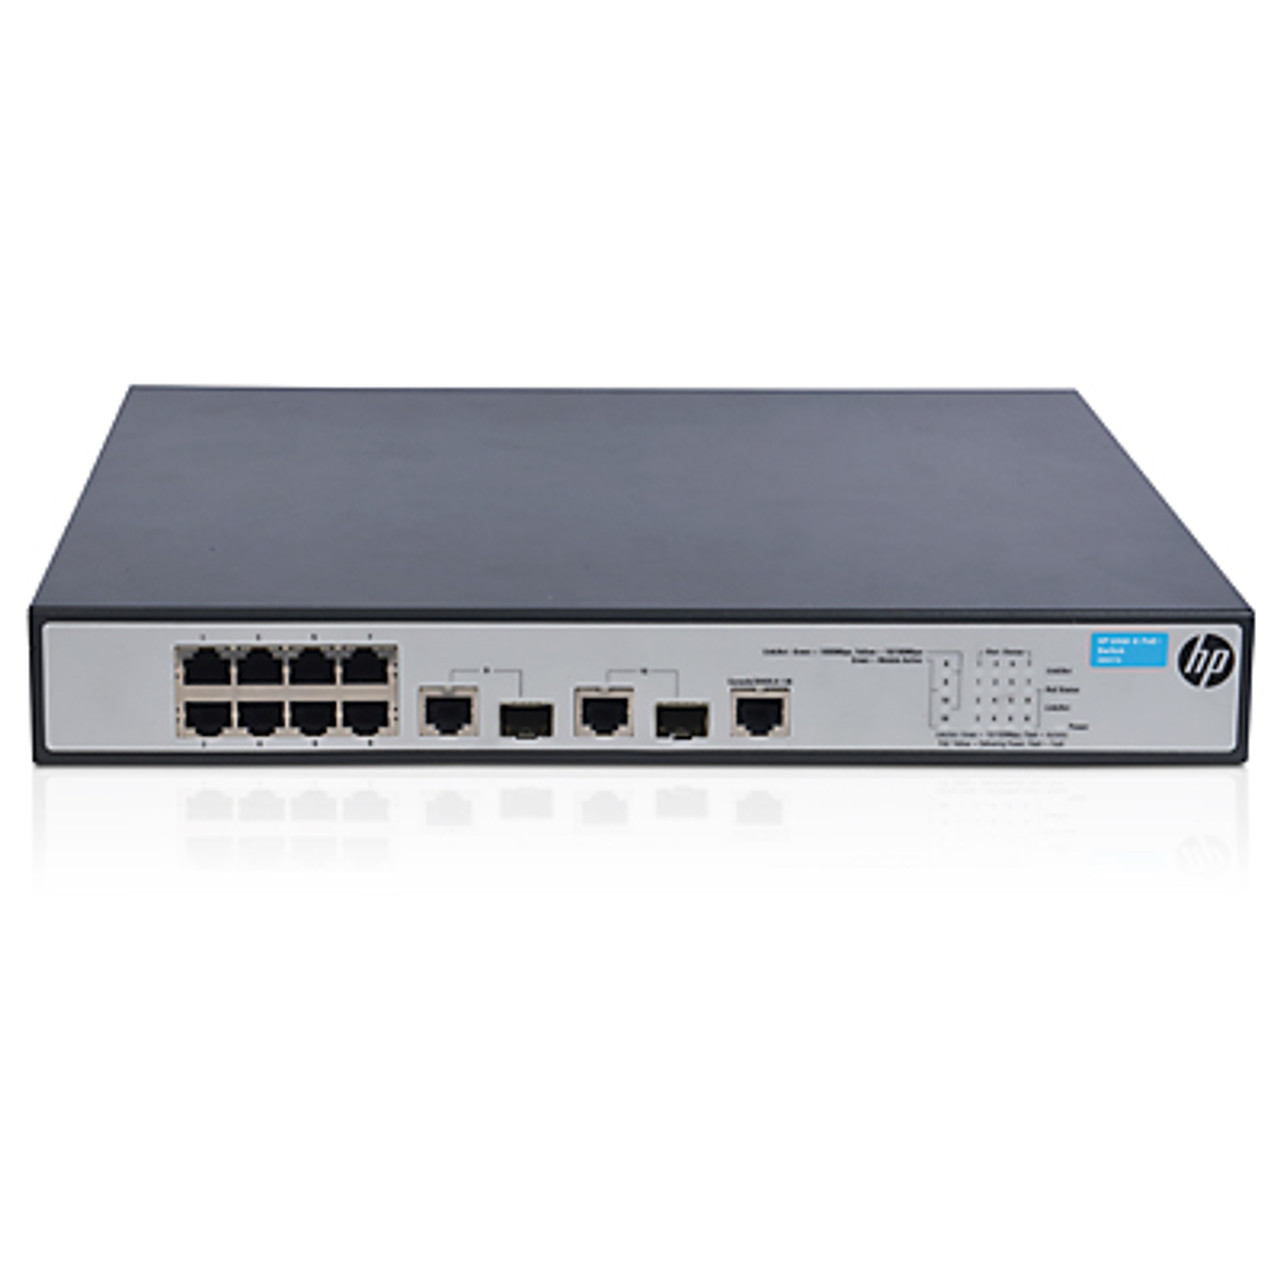 HP 1910-8-PoE+ Switch Switch 8 Ports Managed Rack-mountable